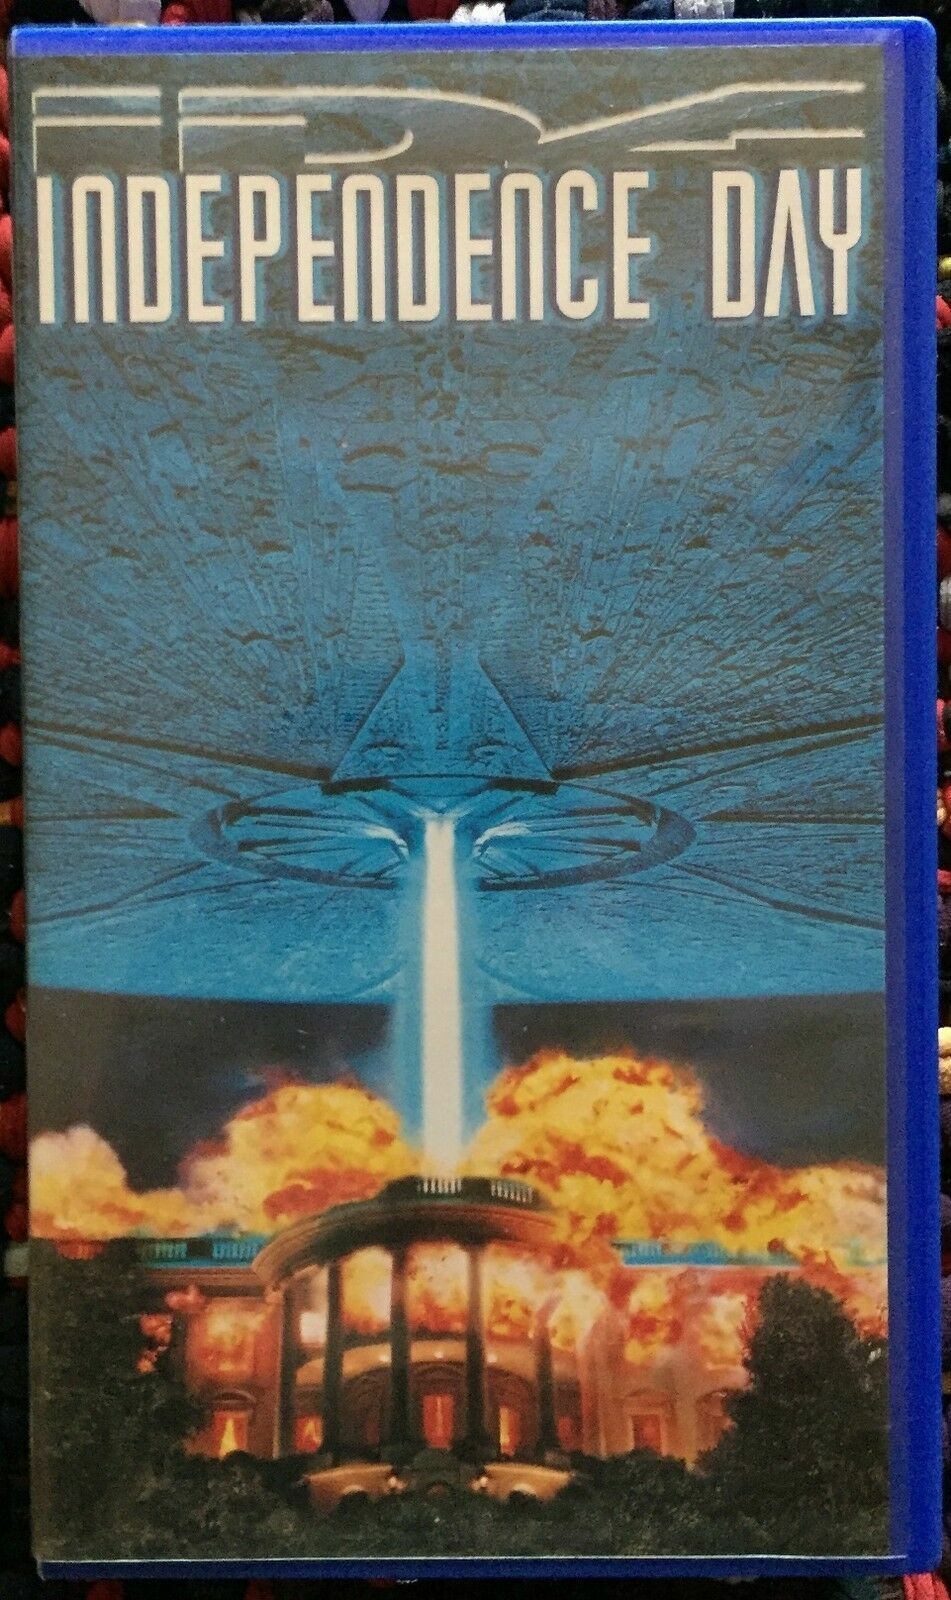 Independence day - Vhs - 1996 - century fox -F